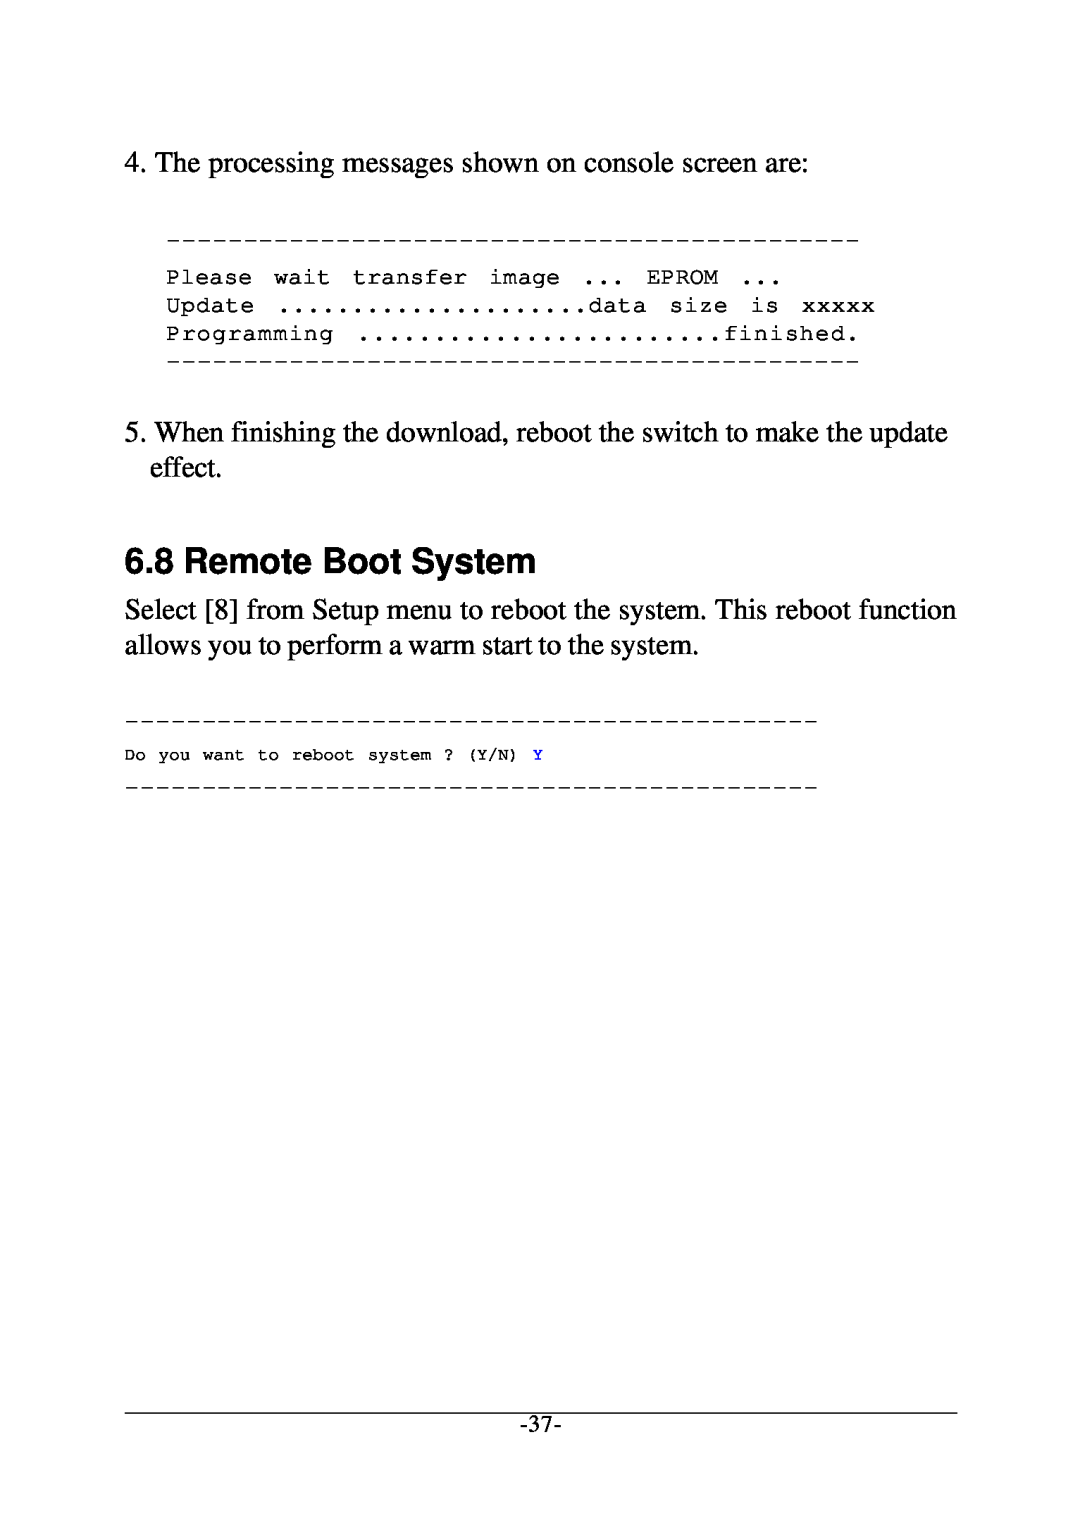 Xerox KS-801 operation manual Remote Boot System 